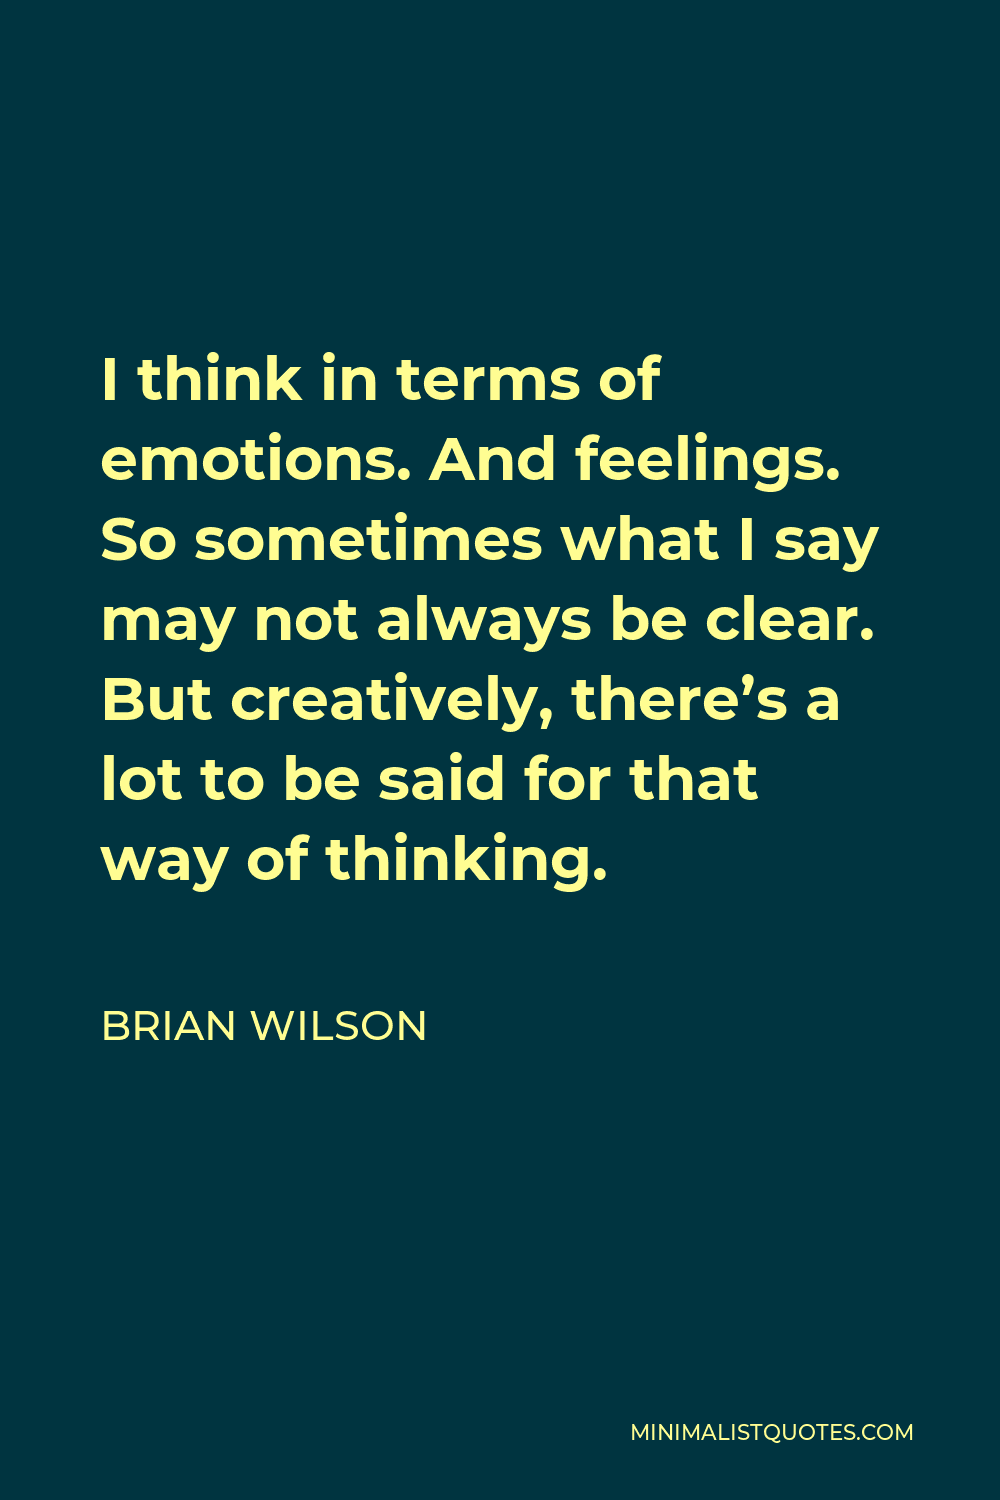 Brian Wilson Quote - I think in terms of emotions. And feelings. So sometimes what I say may not always be clear. But creatively, there’s a lot to be said for that way of thinking.